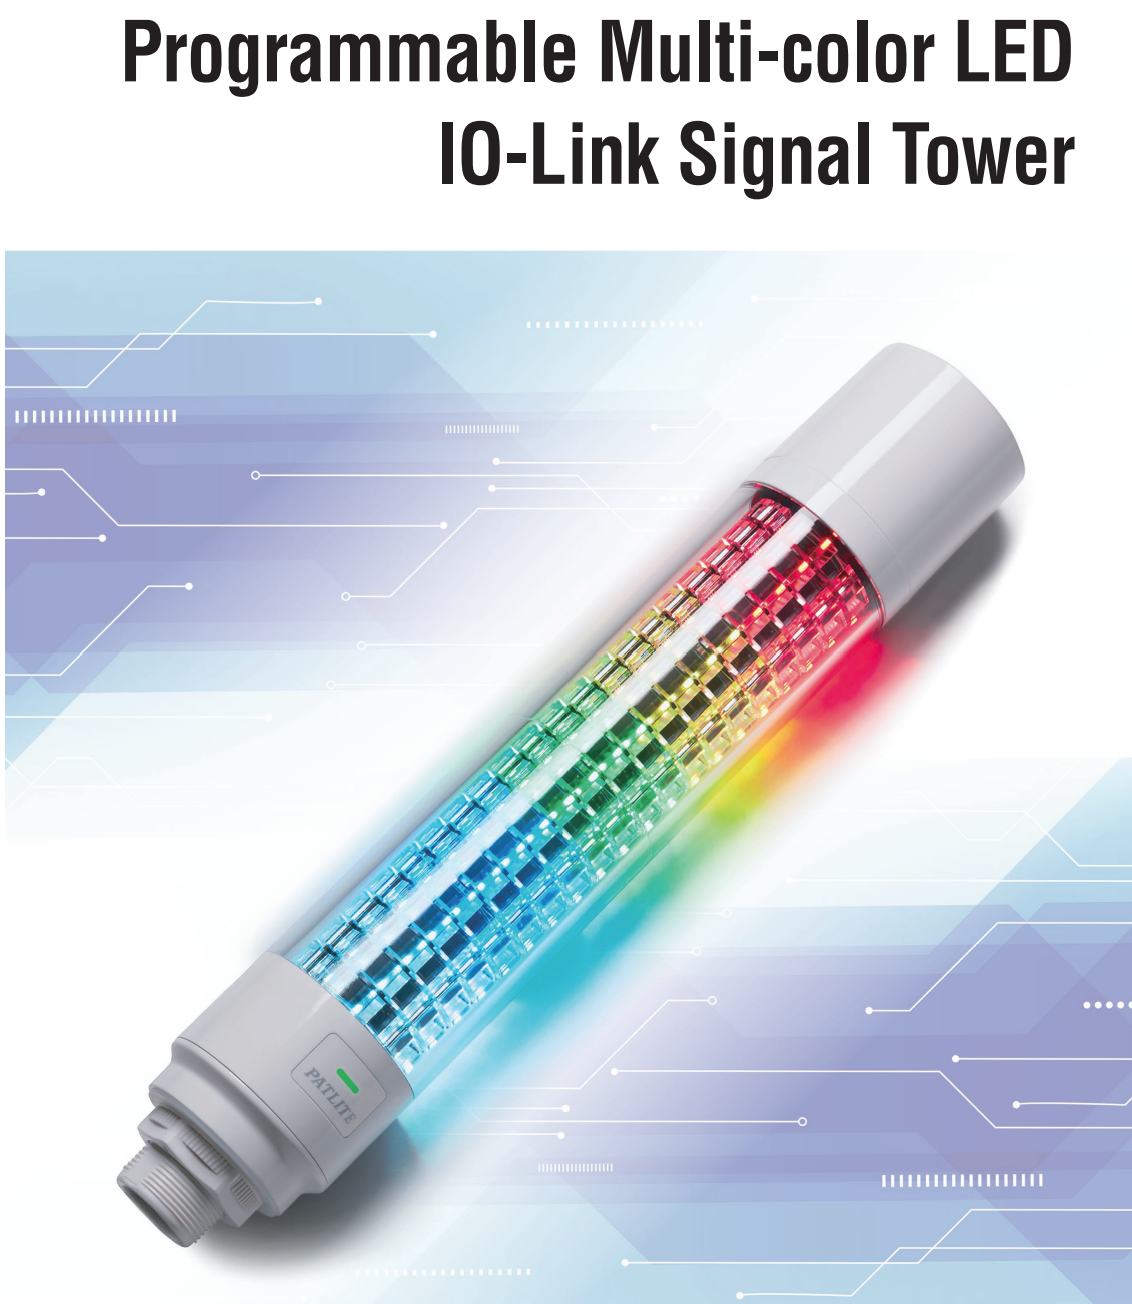 LR4 LR5 LR7 LR6 LB6-20ILWCNW LB6-20ILWCBW PATLITE IO-Link IOlink IO link M12 LB6 LB6-IL LB6-20ILWCNW LED Signal Tower Light RGB Programmable Indicating indication multi colour safety andon warning Banner Werma Schneider Wireless IFM Phoenix Contact Master Slave IoT Melbourne Australia IP rated medical food grade